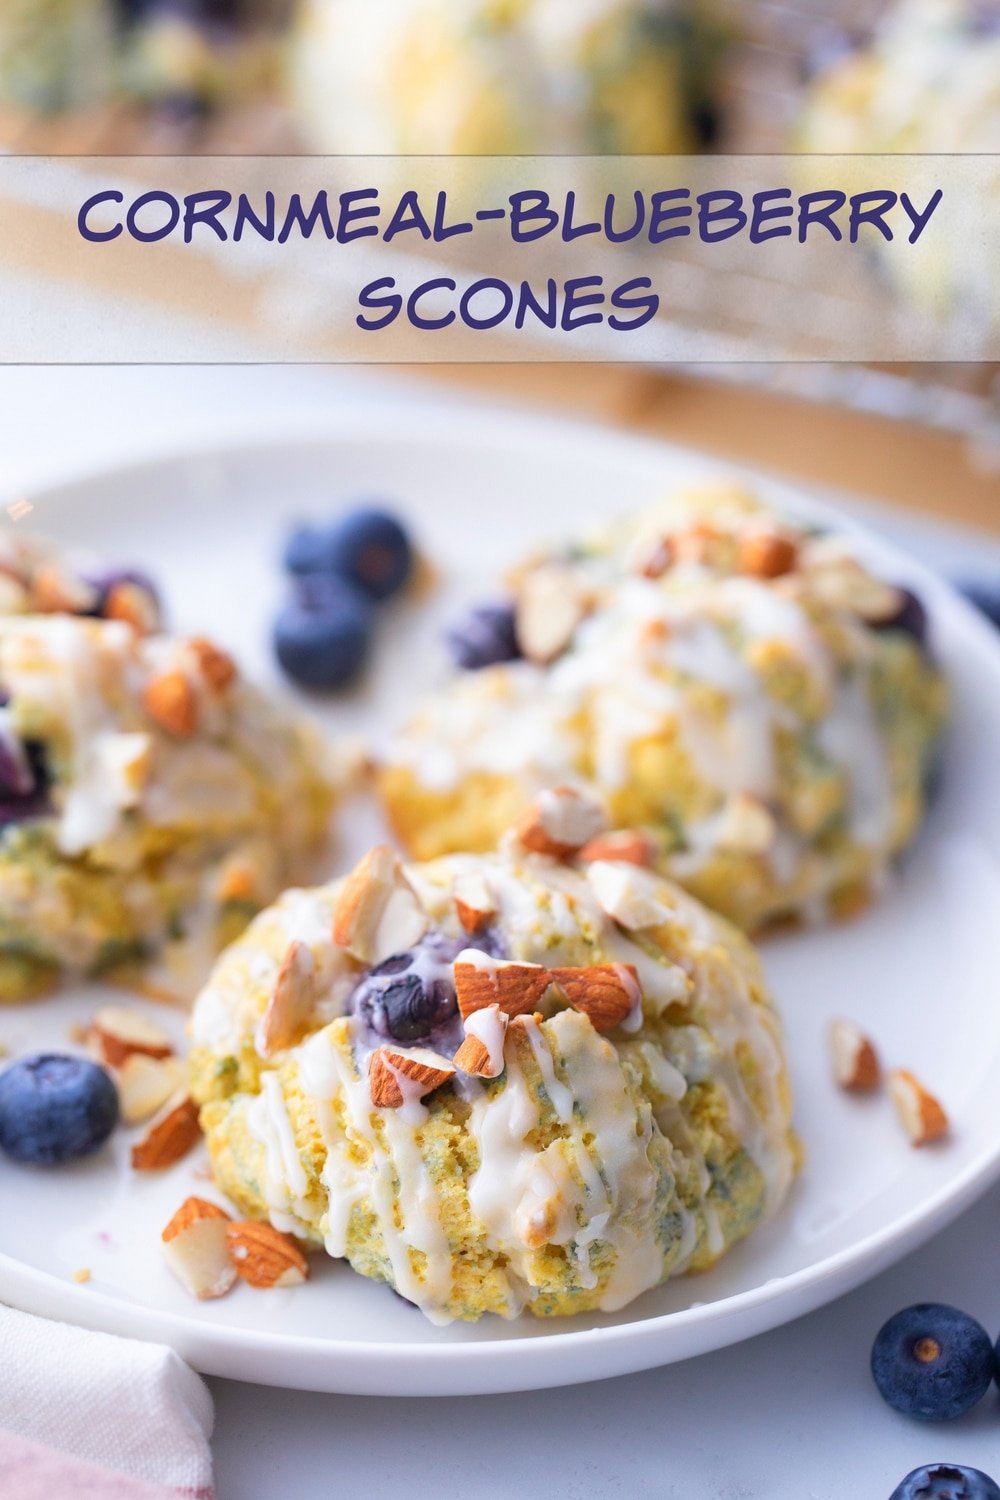 Cornmeal-Blueberry Scones, a welcomed, toothsome treat bursting with sweet blueberries, cornmeal and zippy lime juice and zest to tie all the flavors together. via @cmpollak1